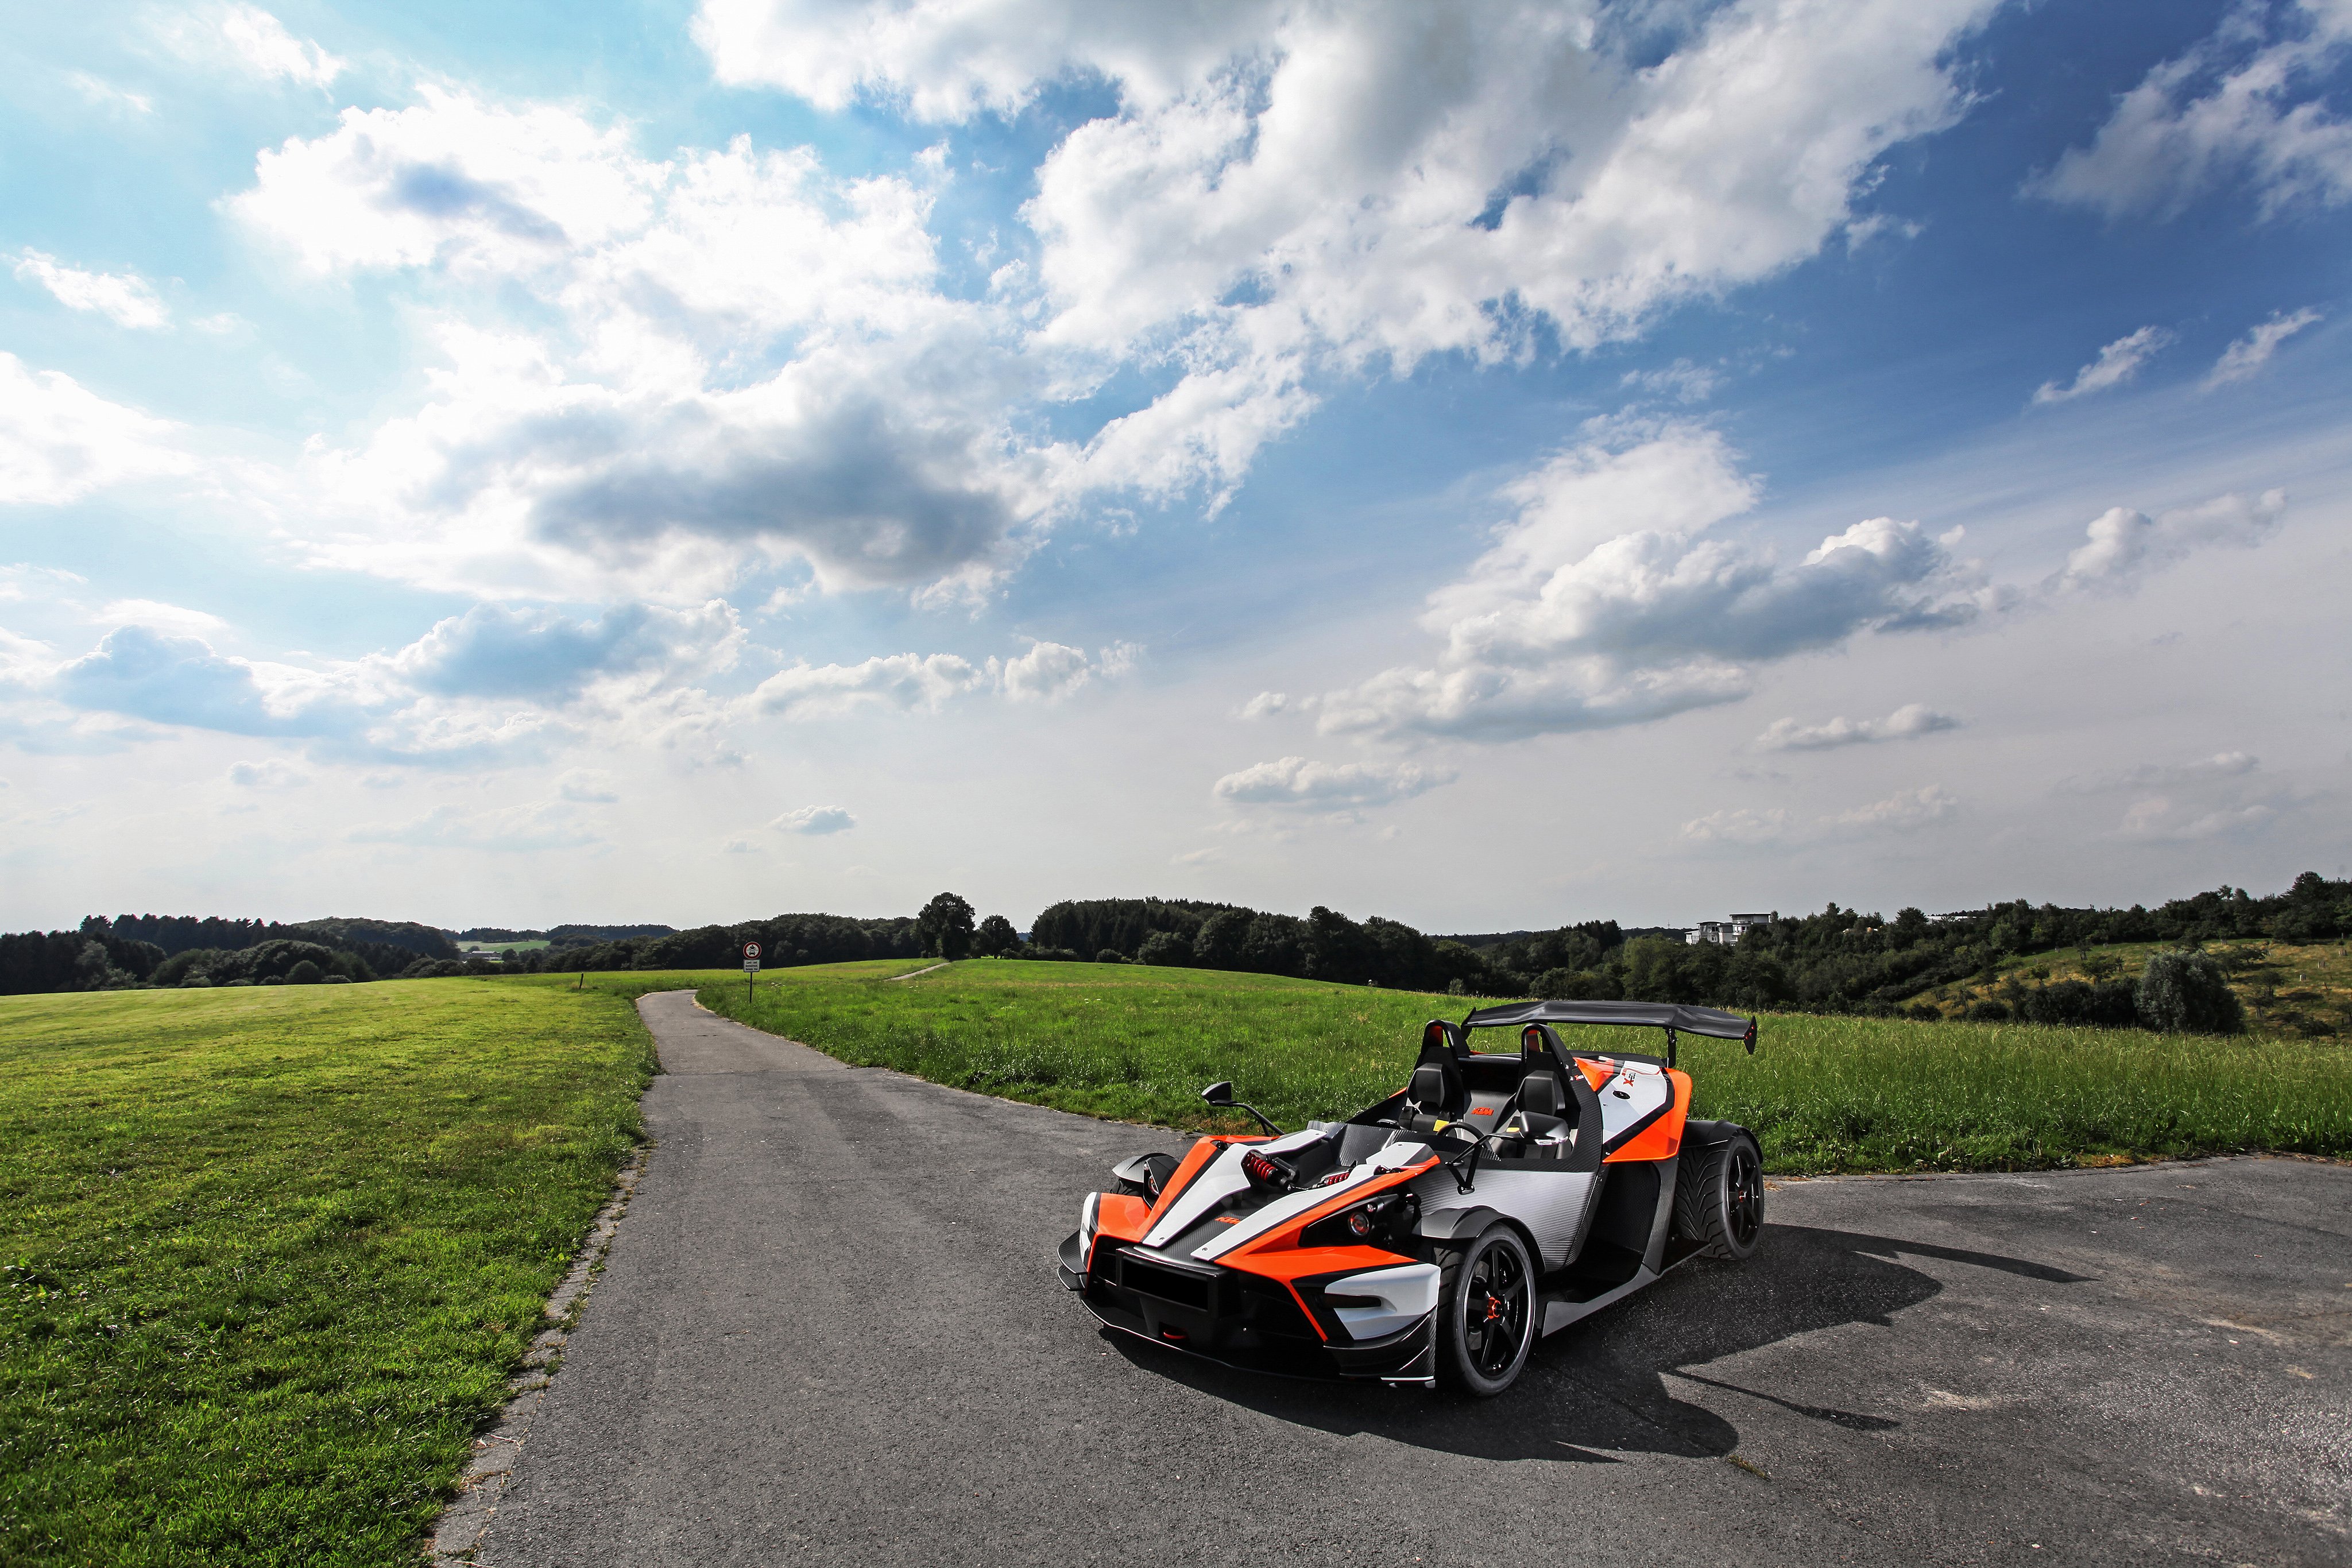 2016, Wimmer, R s, Ktm, X bow, Supercar, Race, Racing Wallpaper